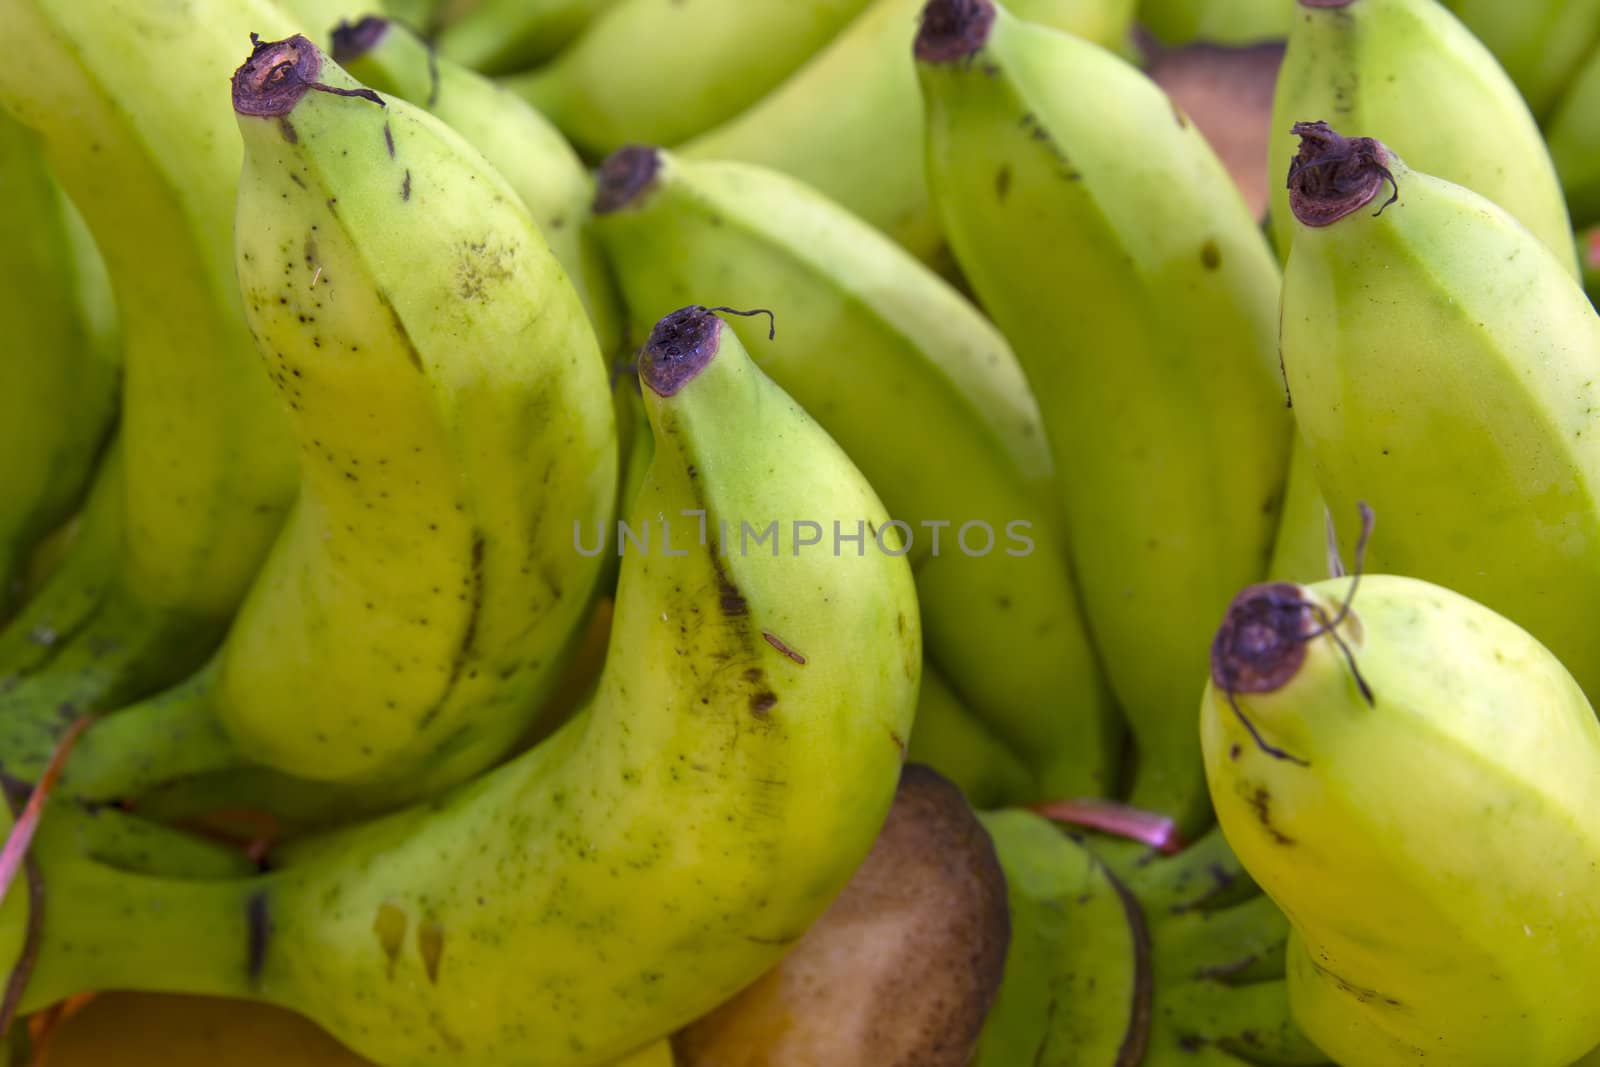 Green Bananas Bunches on Fruit Stand in Tropical Country